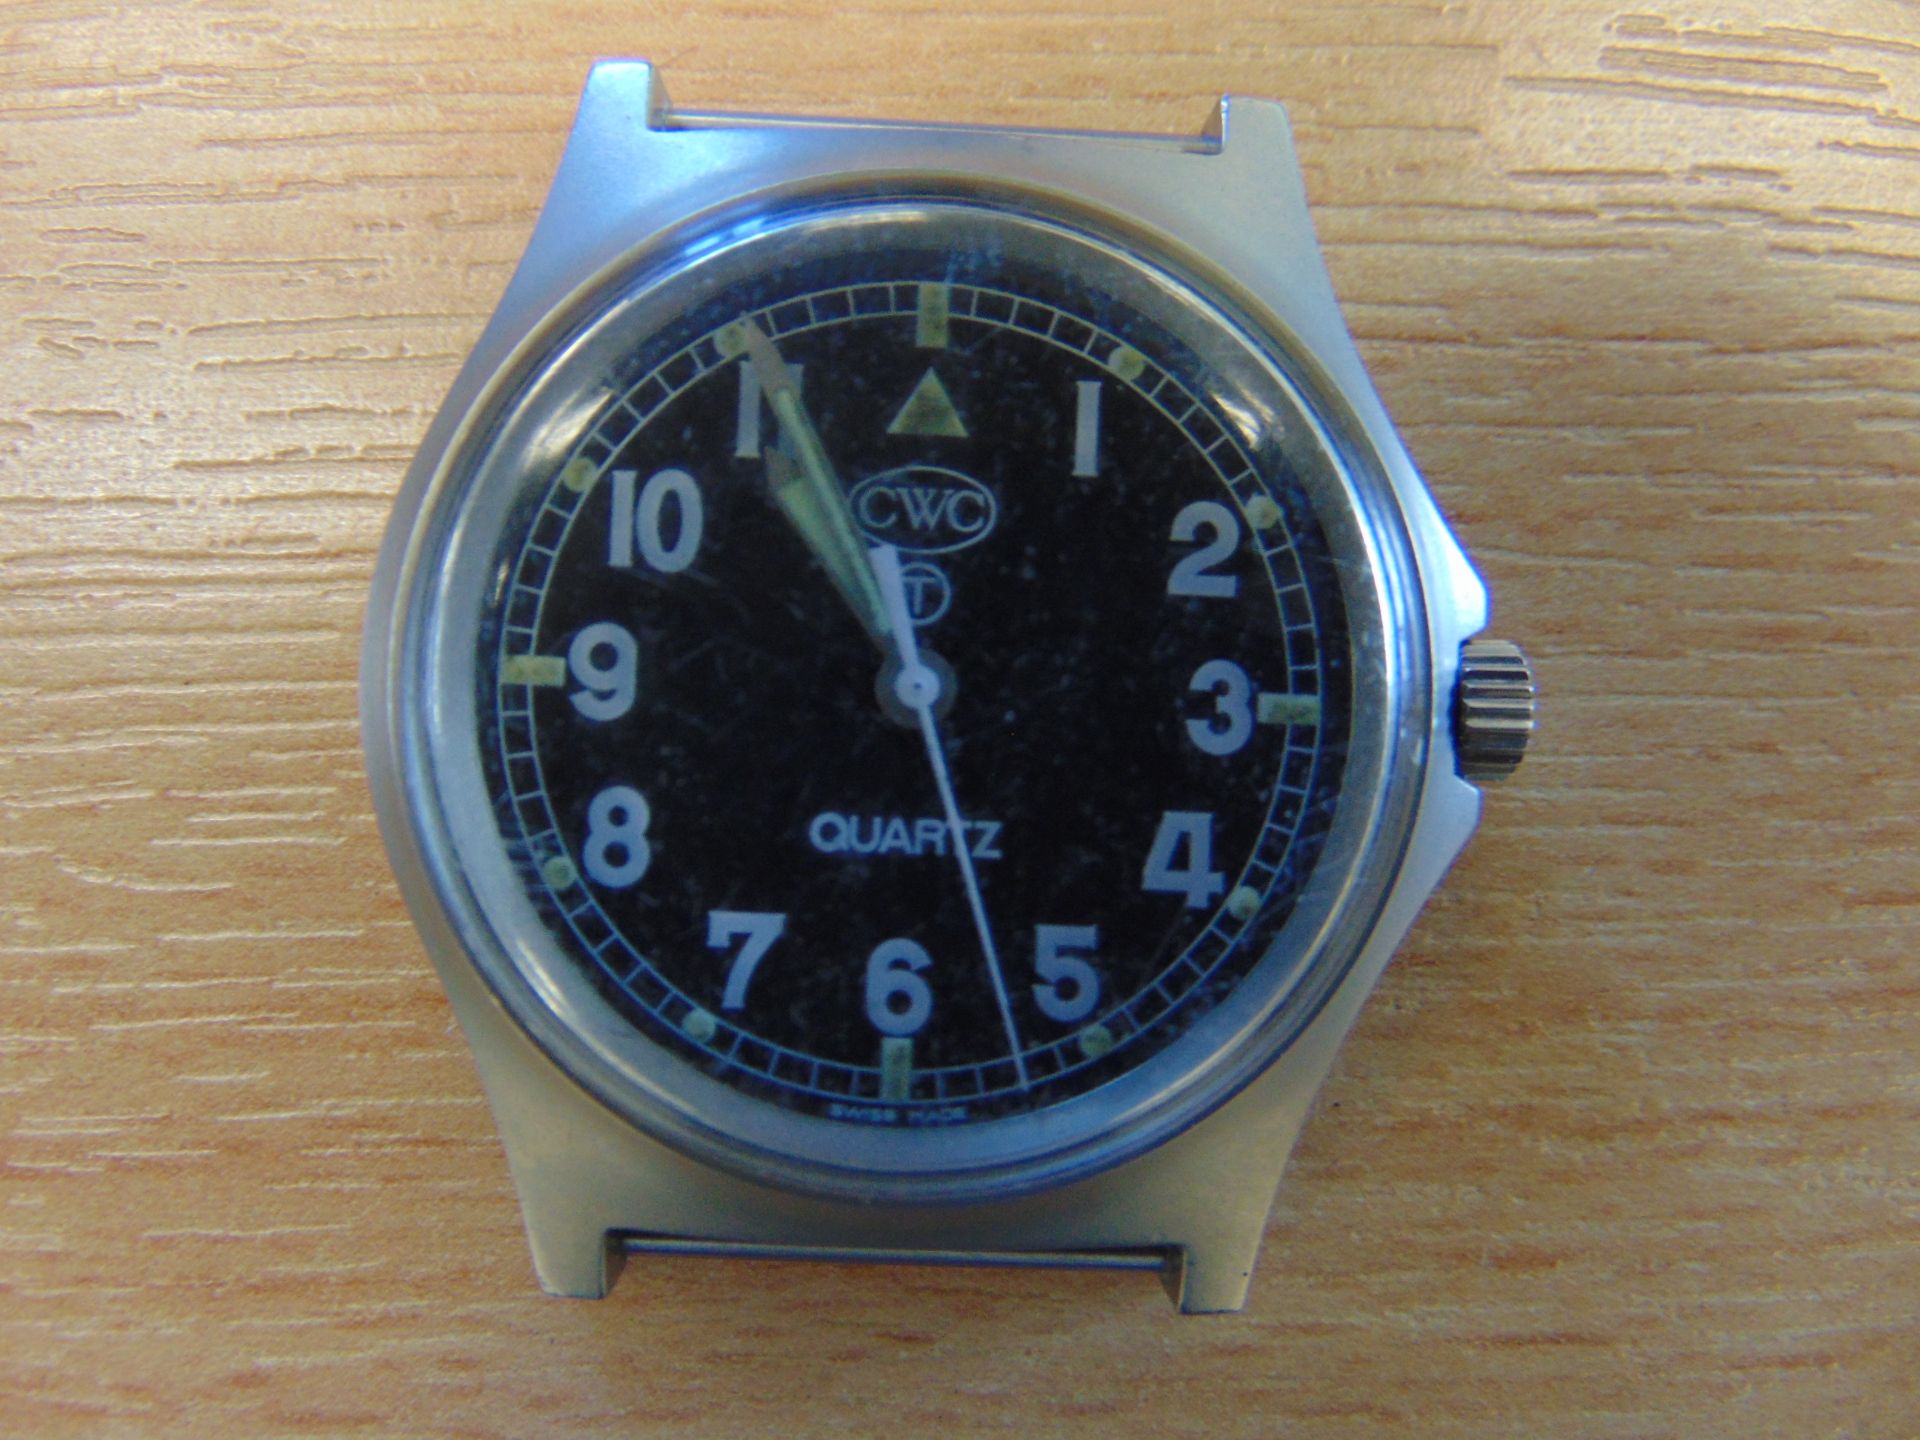 CWC (Cabot Watch Co Switzerland) British Army W10 Service Watch Nato Marks, Low Serial No 849 - Image 2 of 5